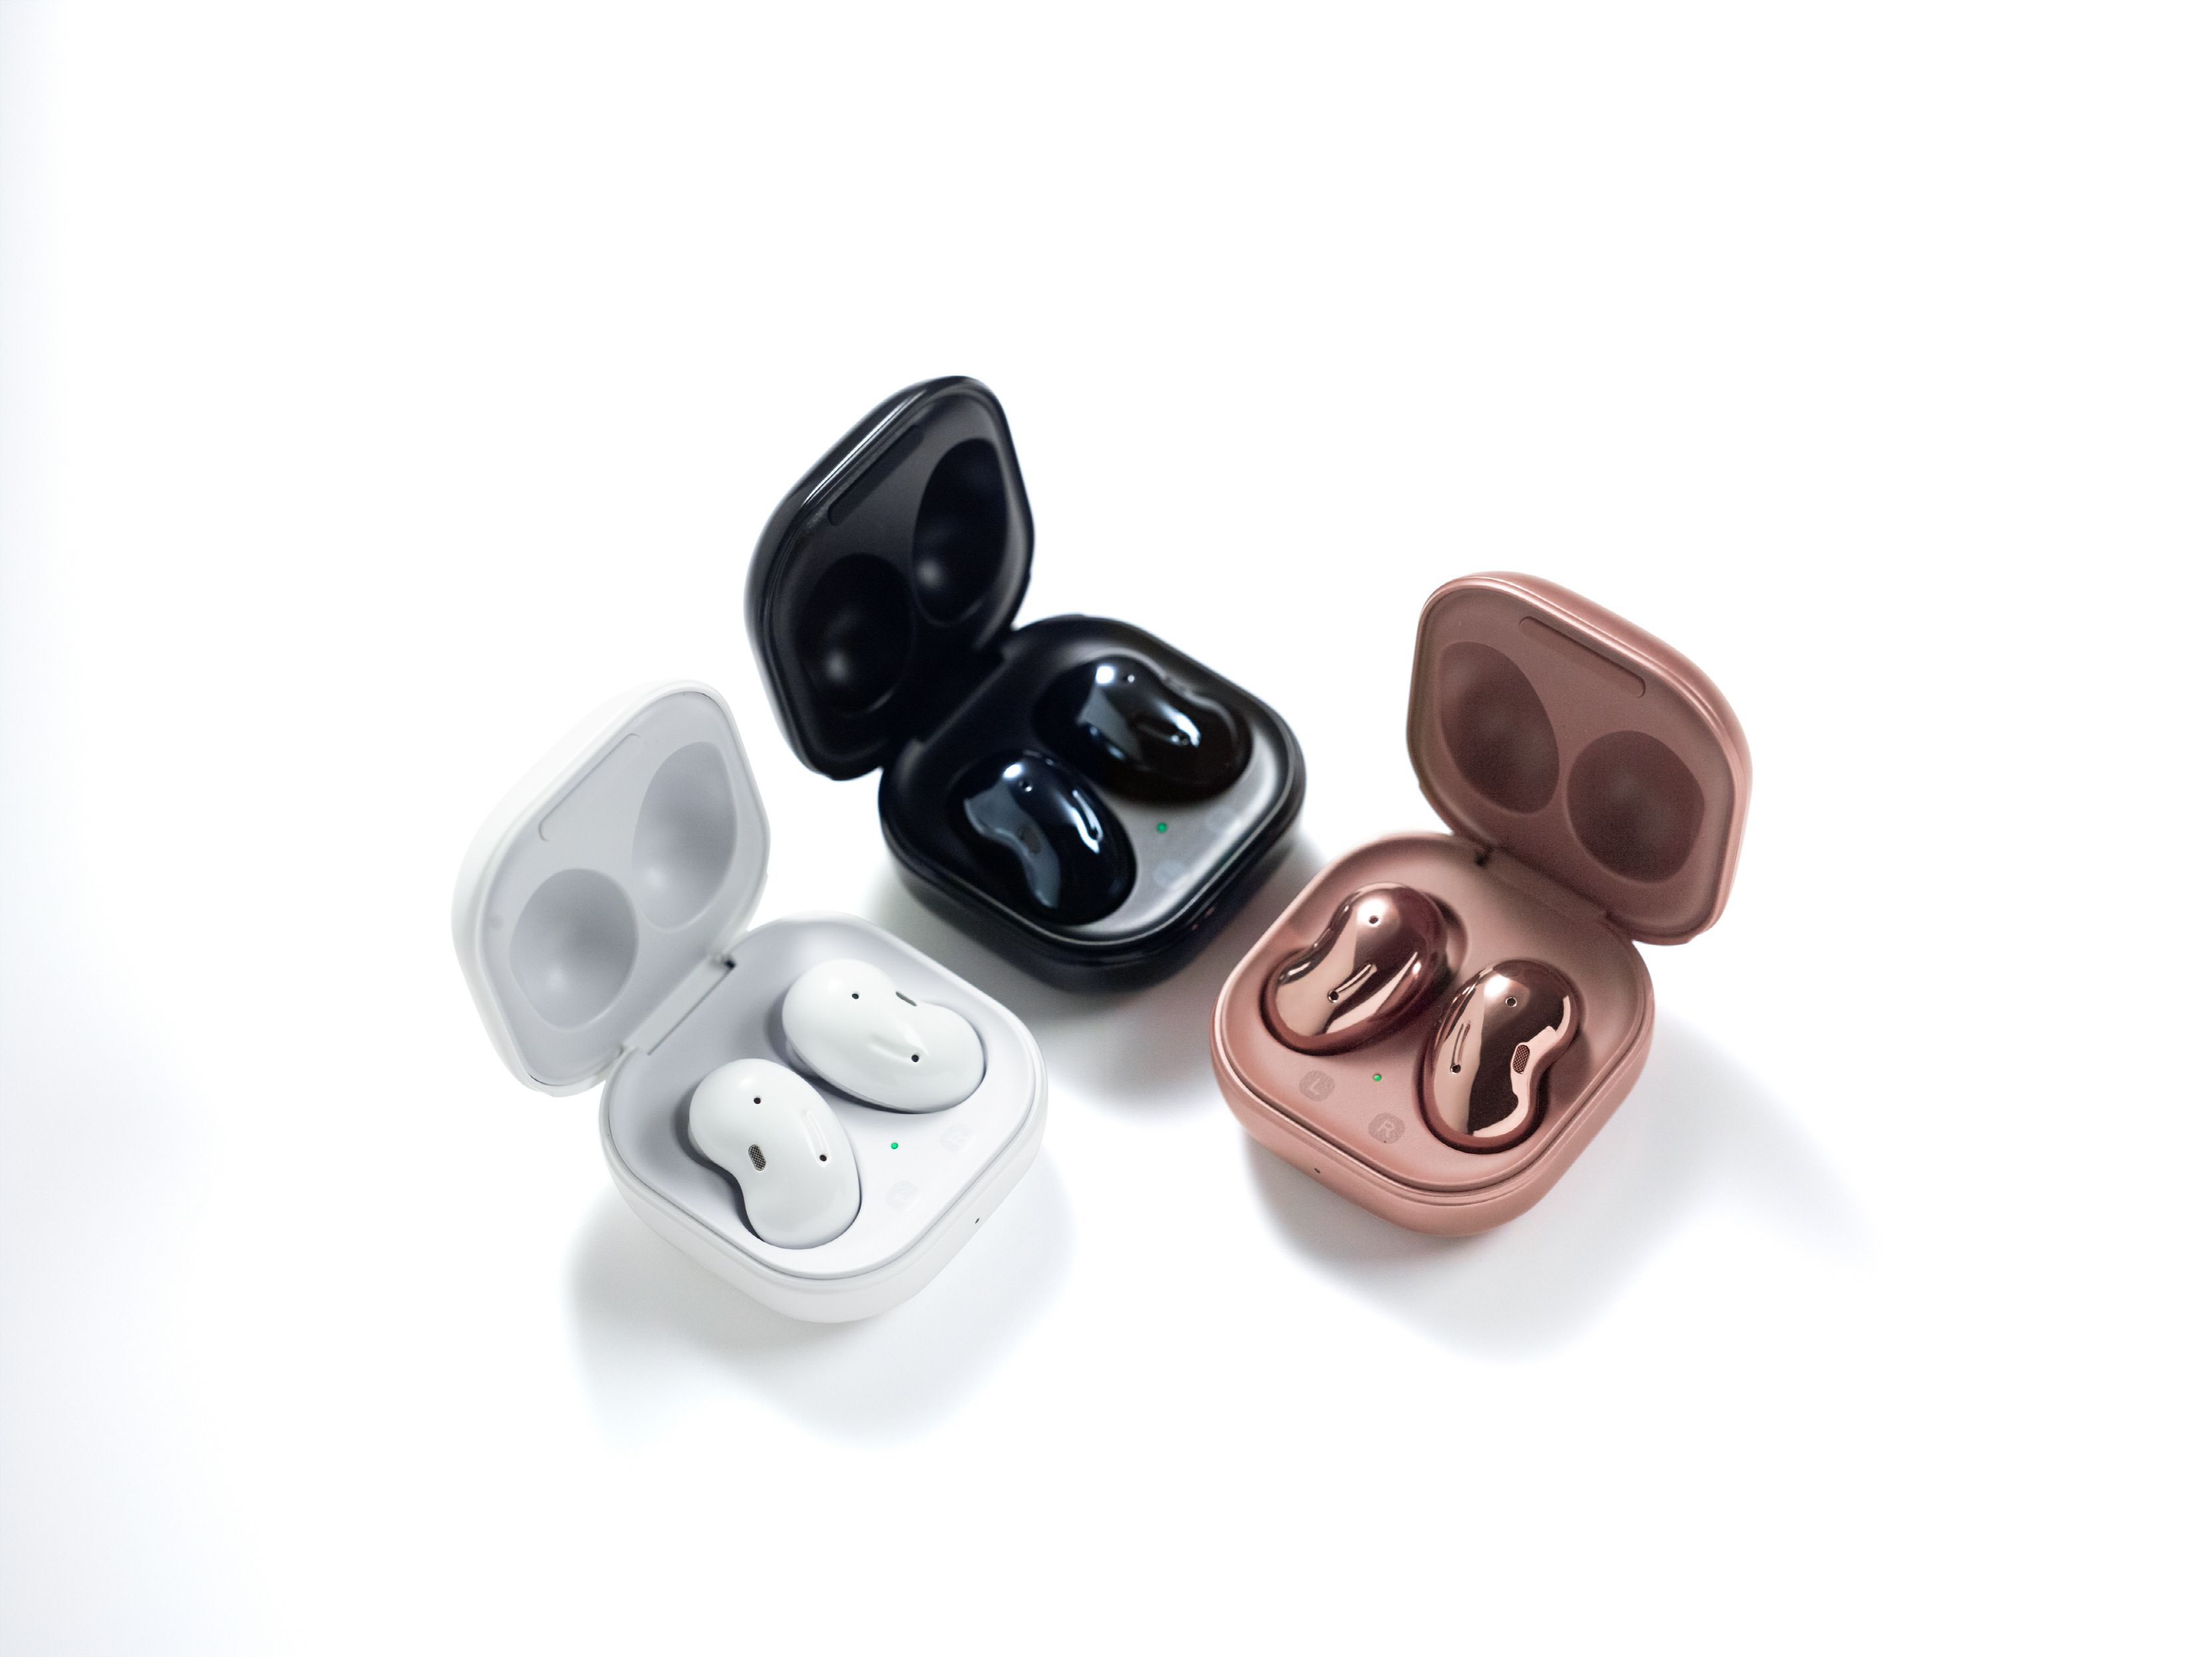 Samsung Galaxy Buds Live (all the colors)